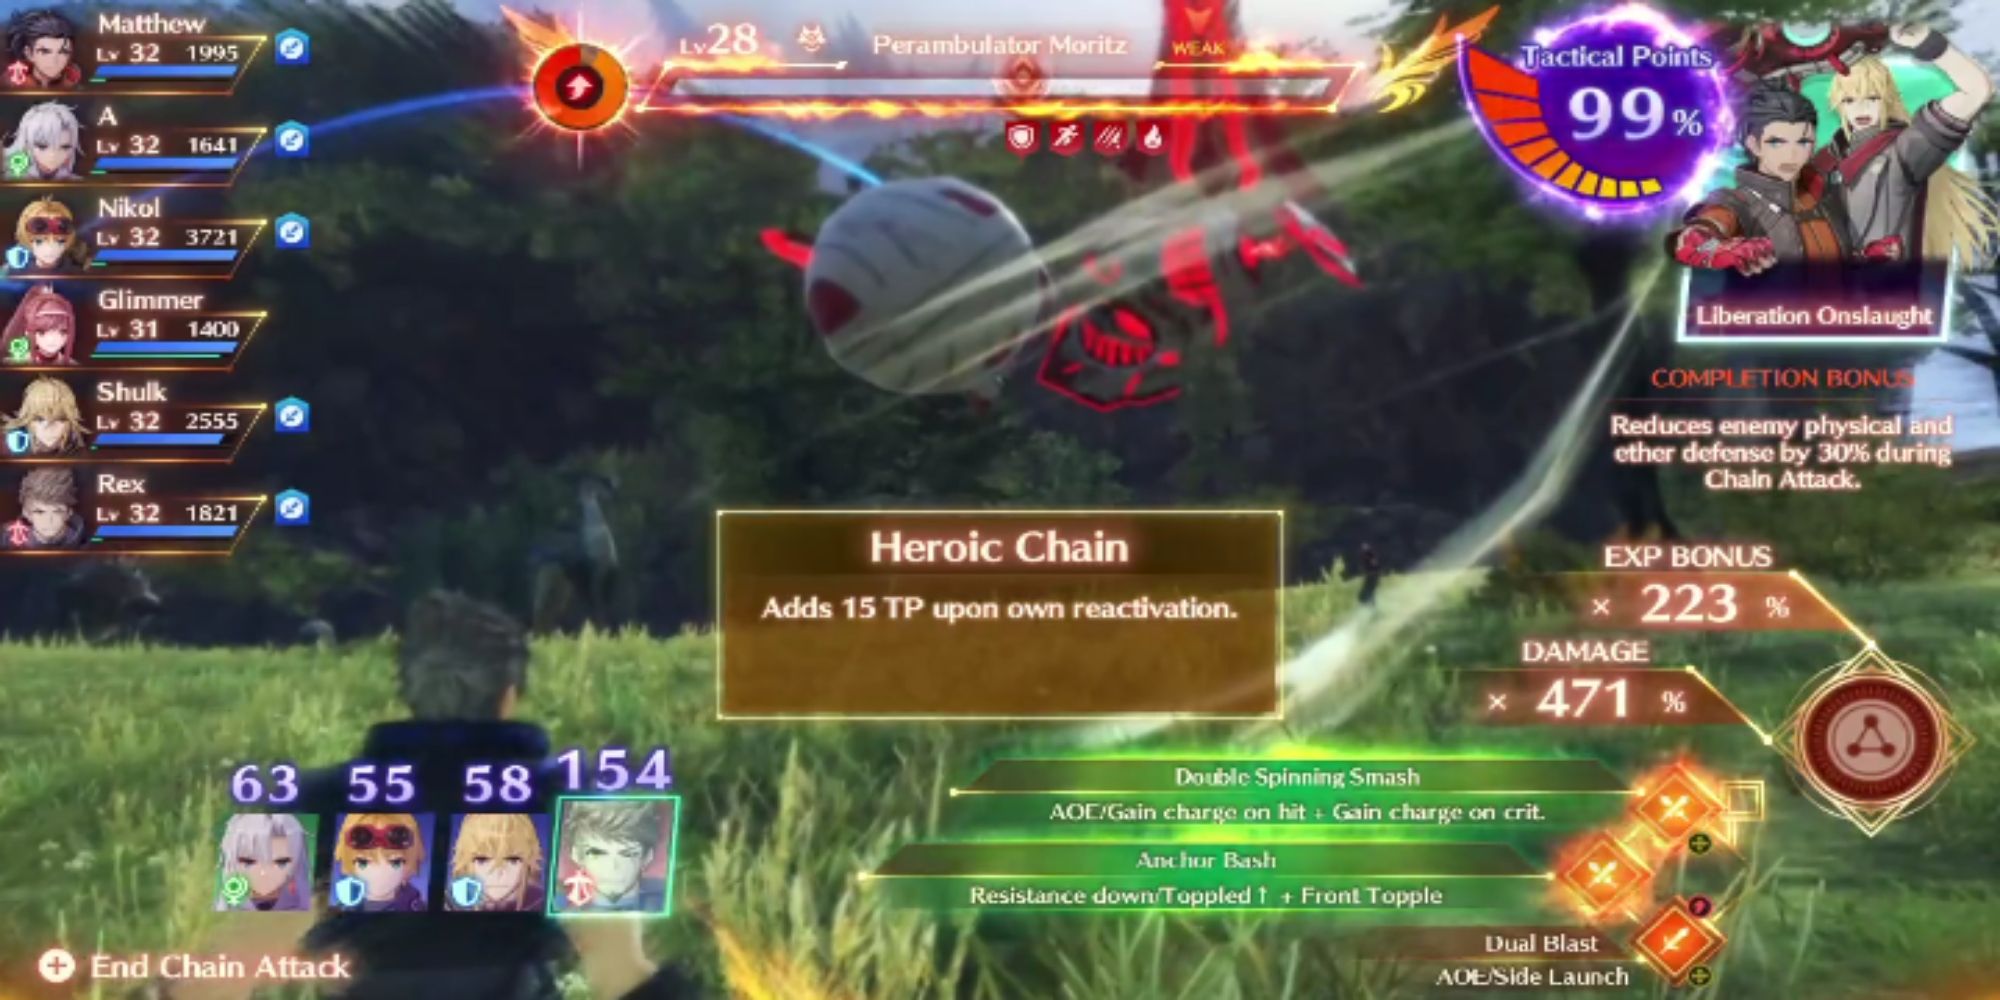 Xenoblade Chronicles 3: Future Redeemed Review — Hot Gamers Only